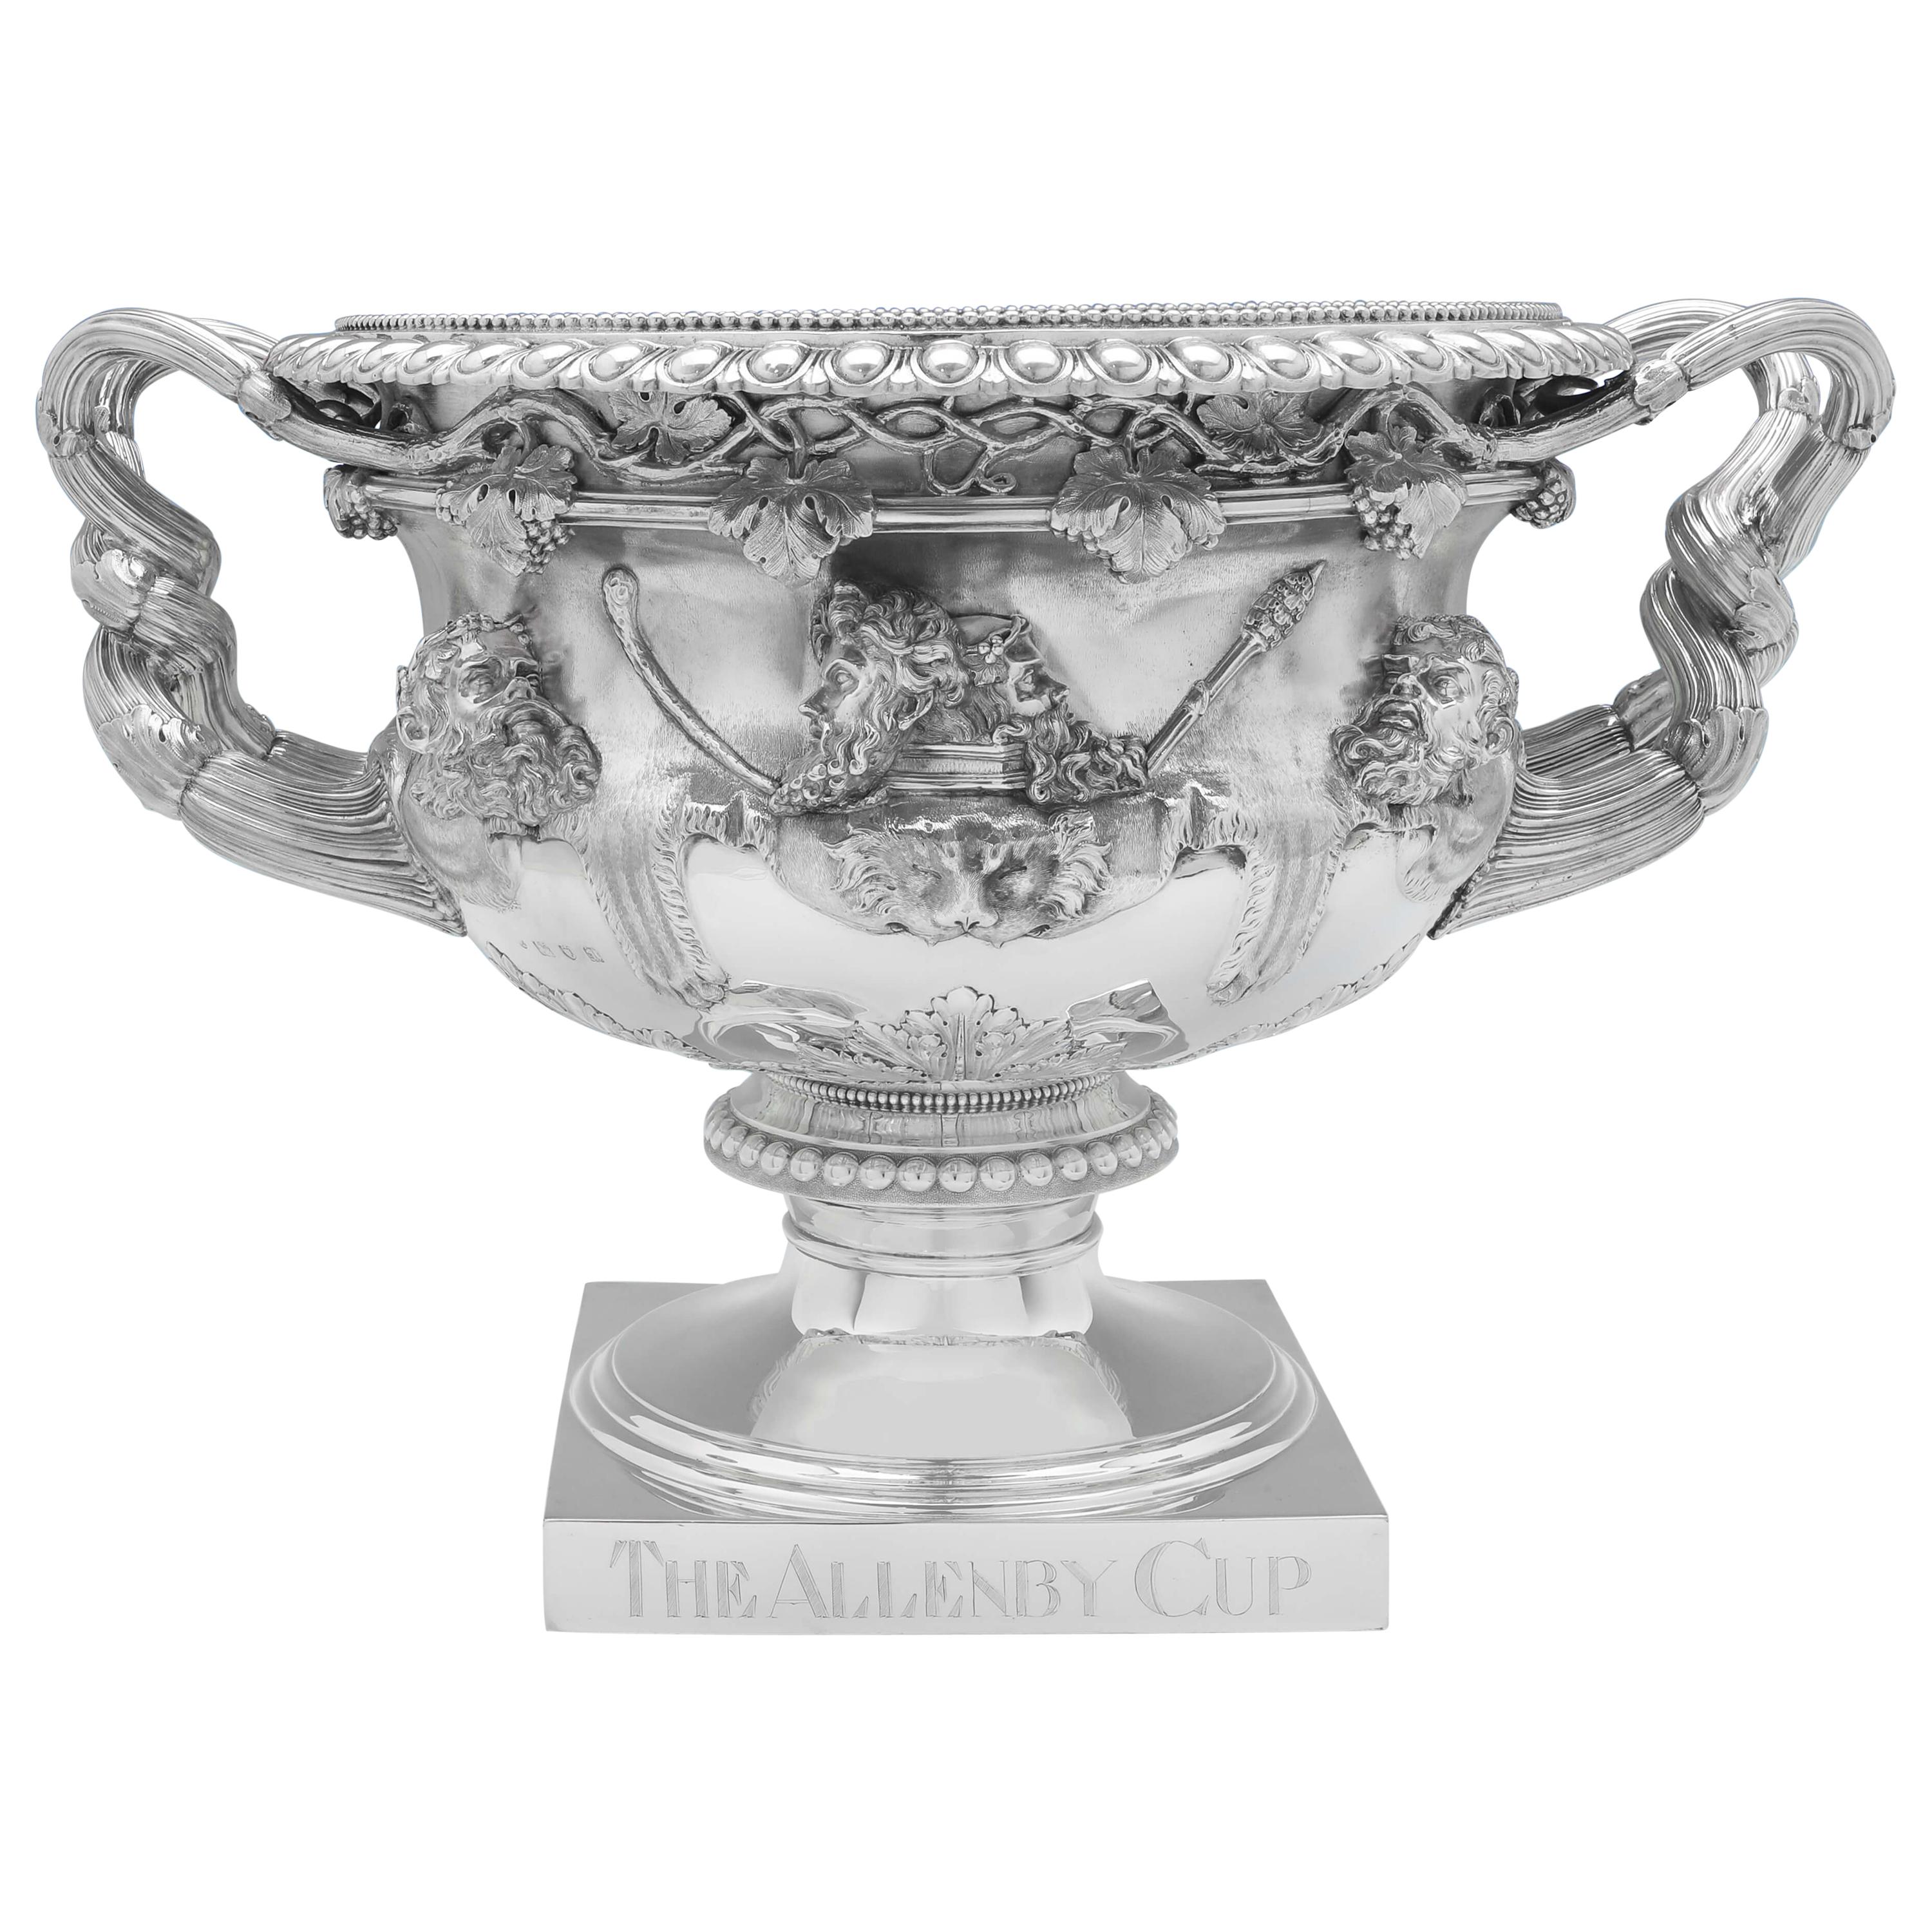 'The Allenby Cup' a Monumental Sterling Silver Warwick Vase by Barnards, 1906